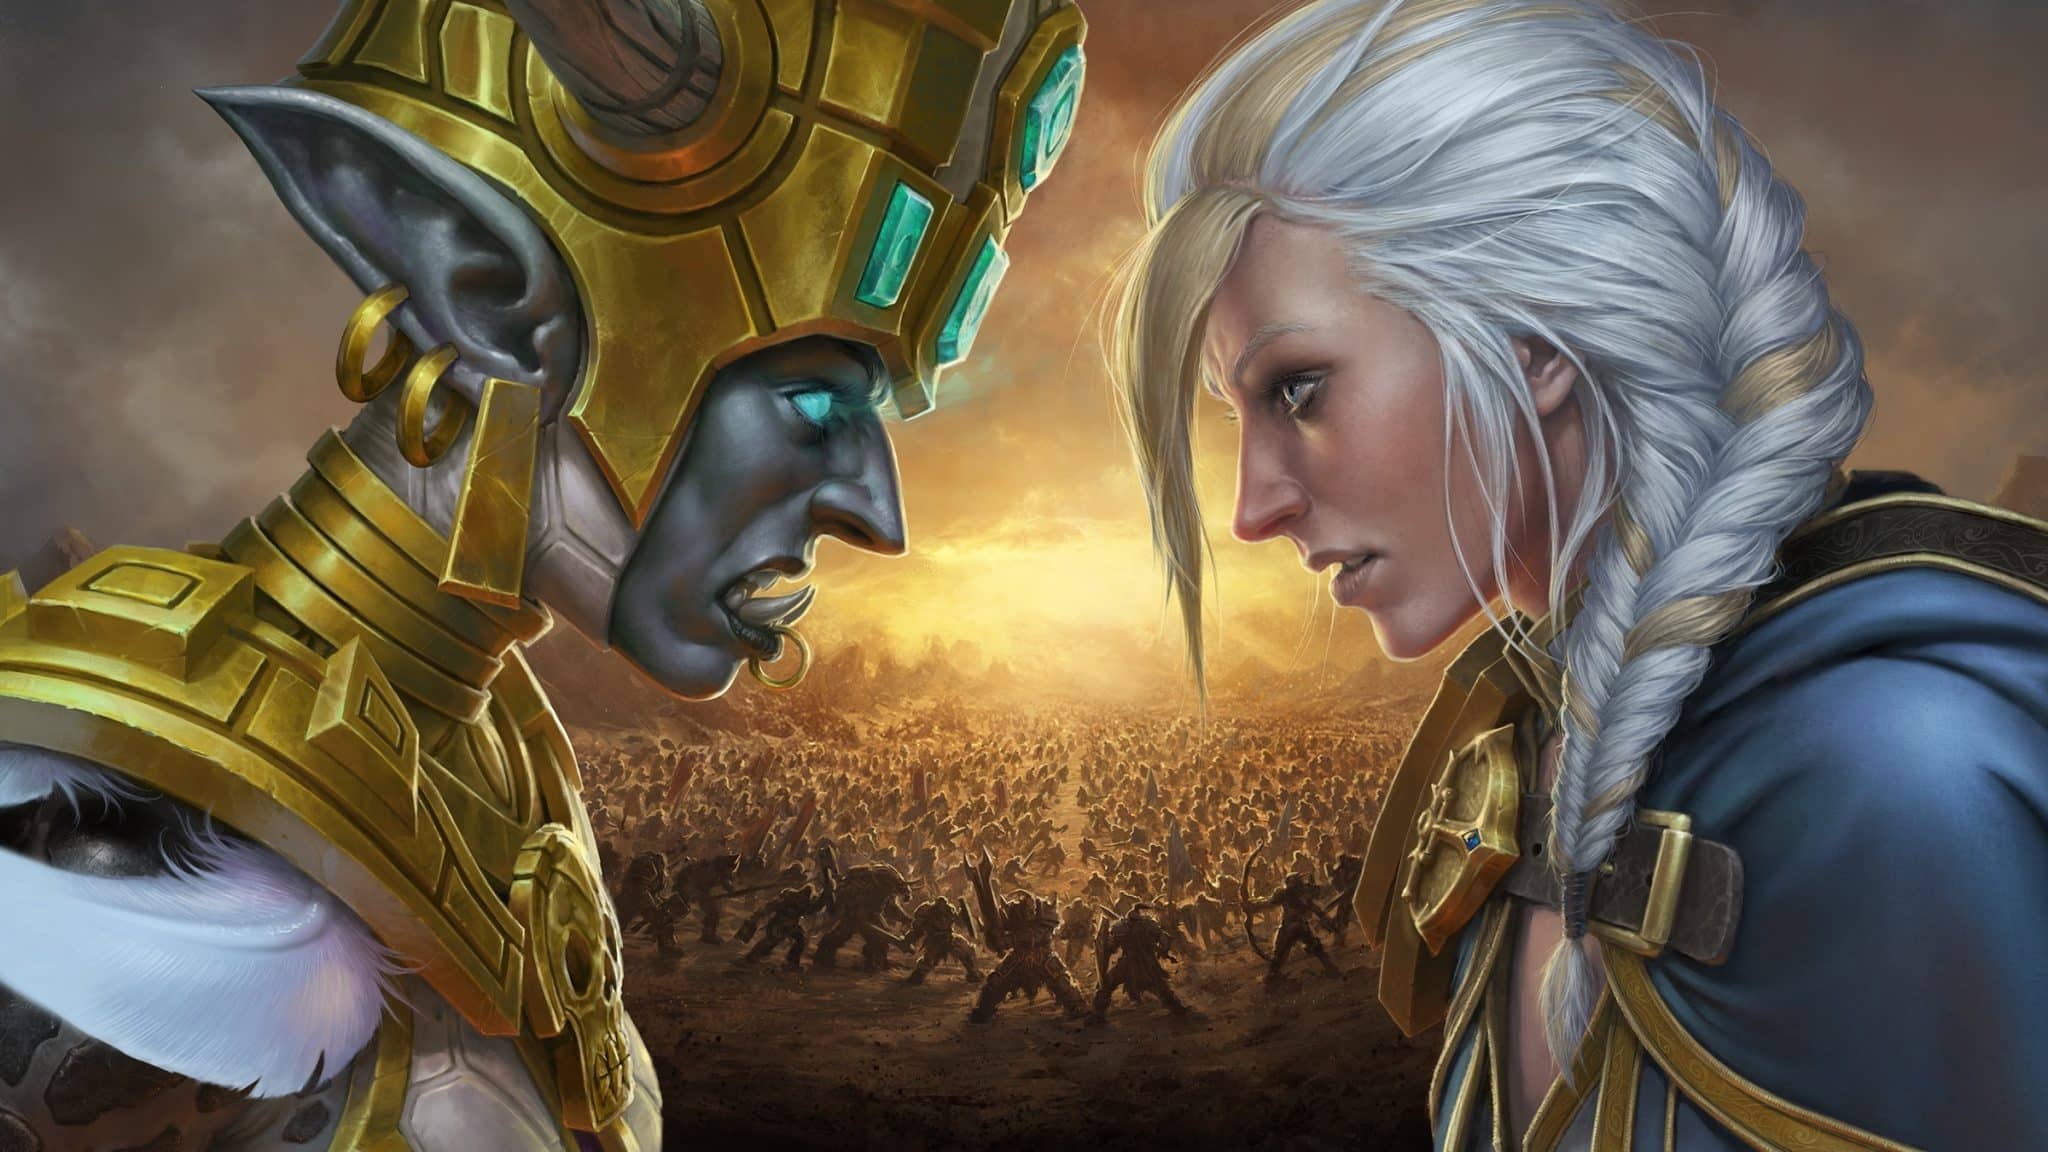 world of warcraft wow battle for azeroth bfa jaina and talanji glare at each other as horde and alliance factions fight in the background